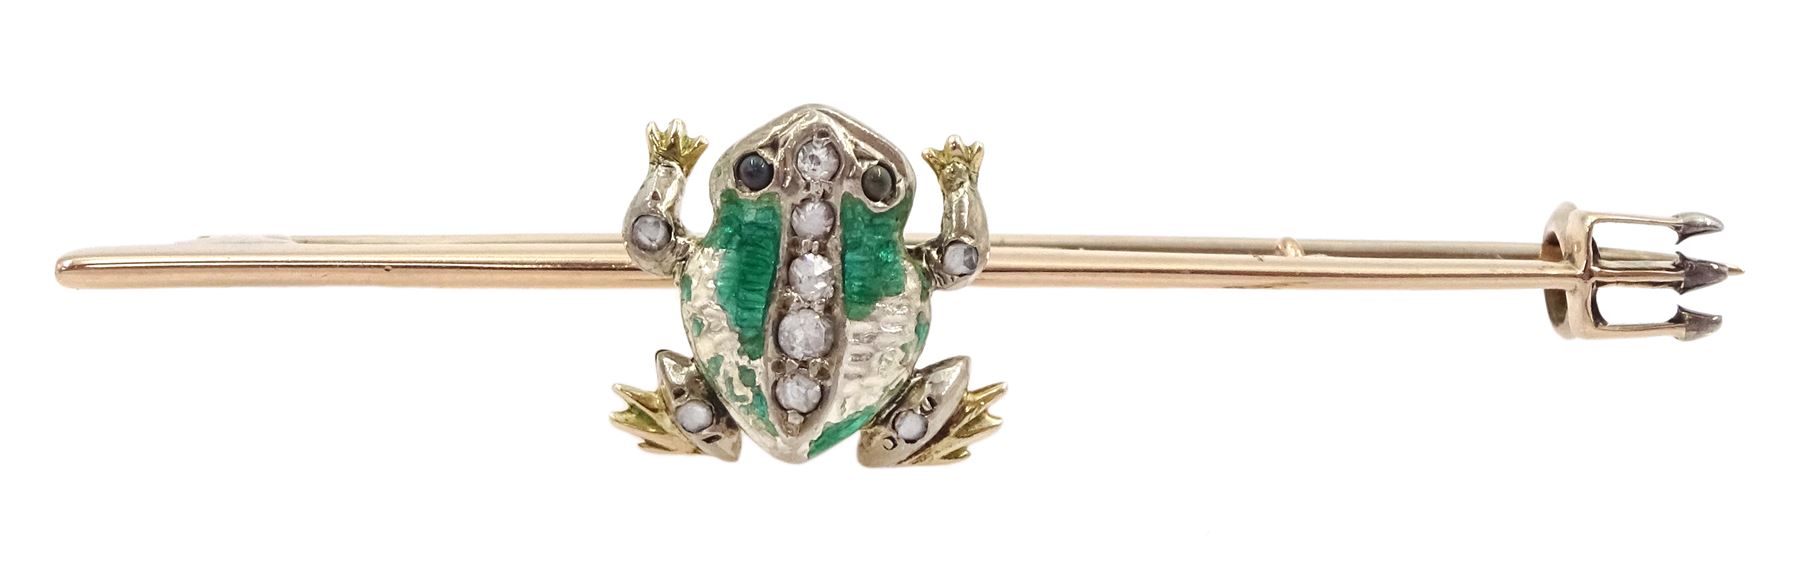 Edwardian frog and spear brooch